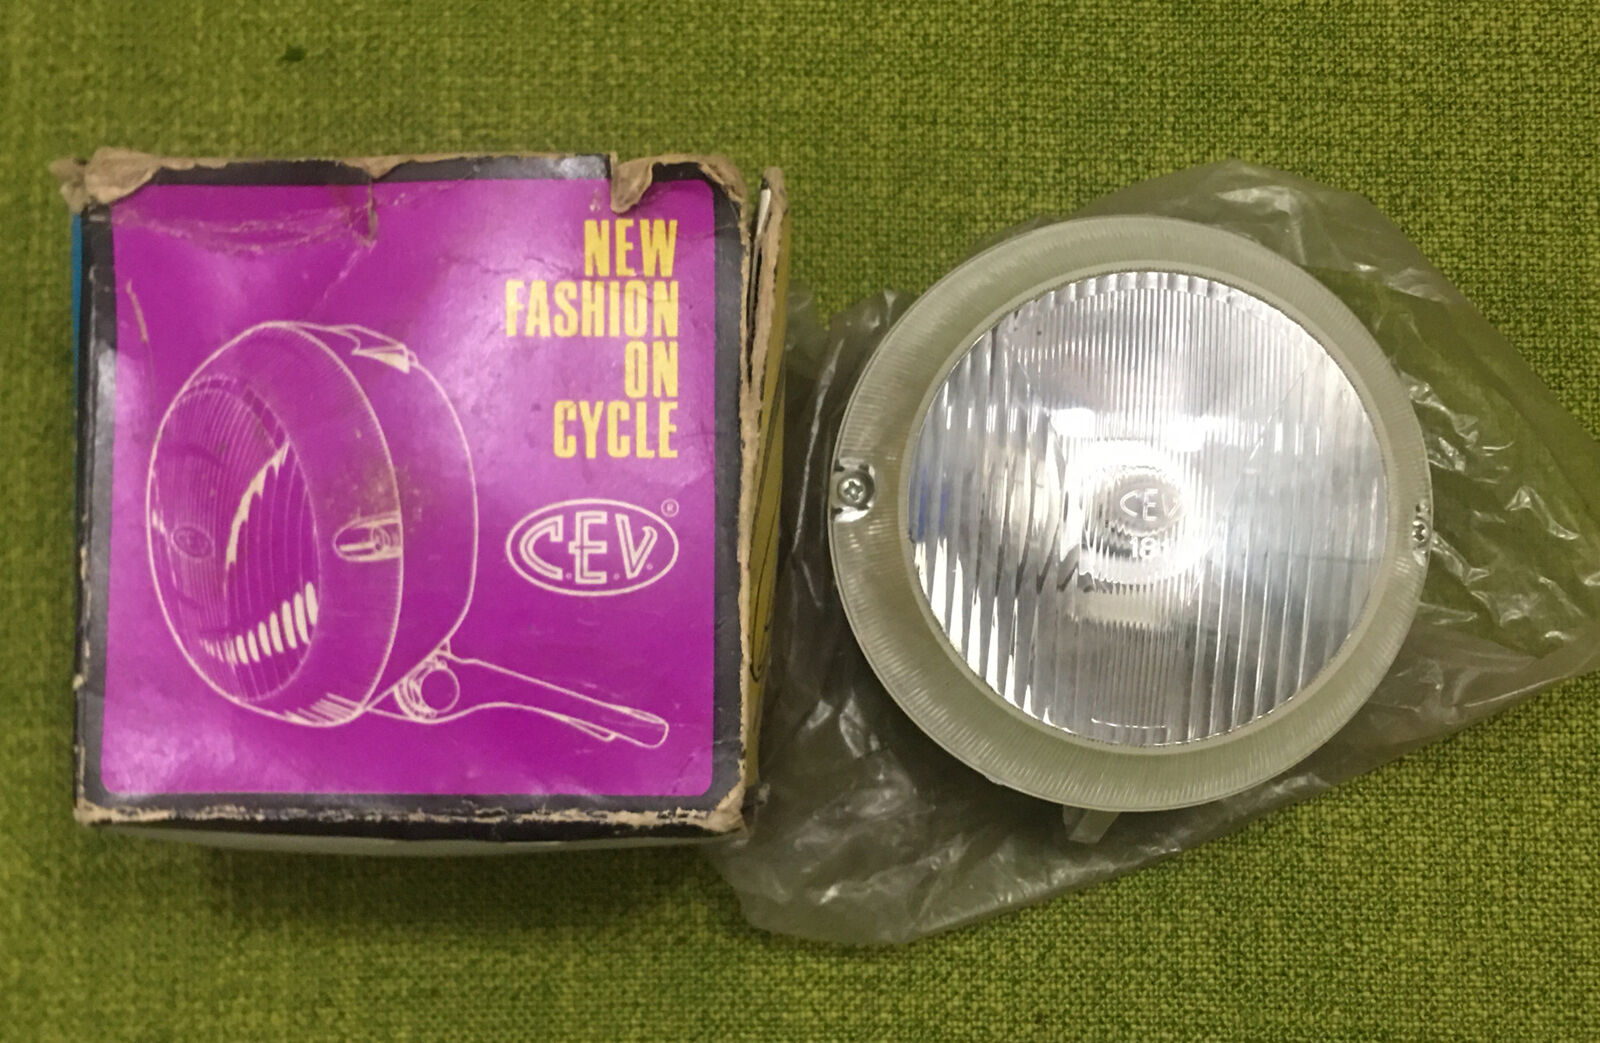 NOS Vintage CEV PAGANI ITALY Battery Bicycle Headlight LAMP Mod. 5619 Part F7112